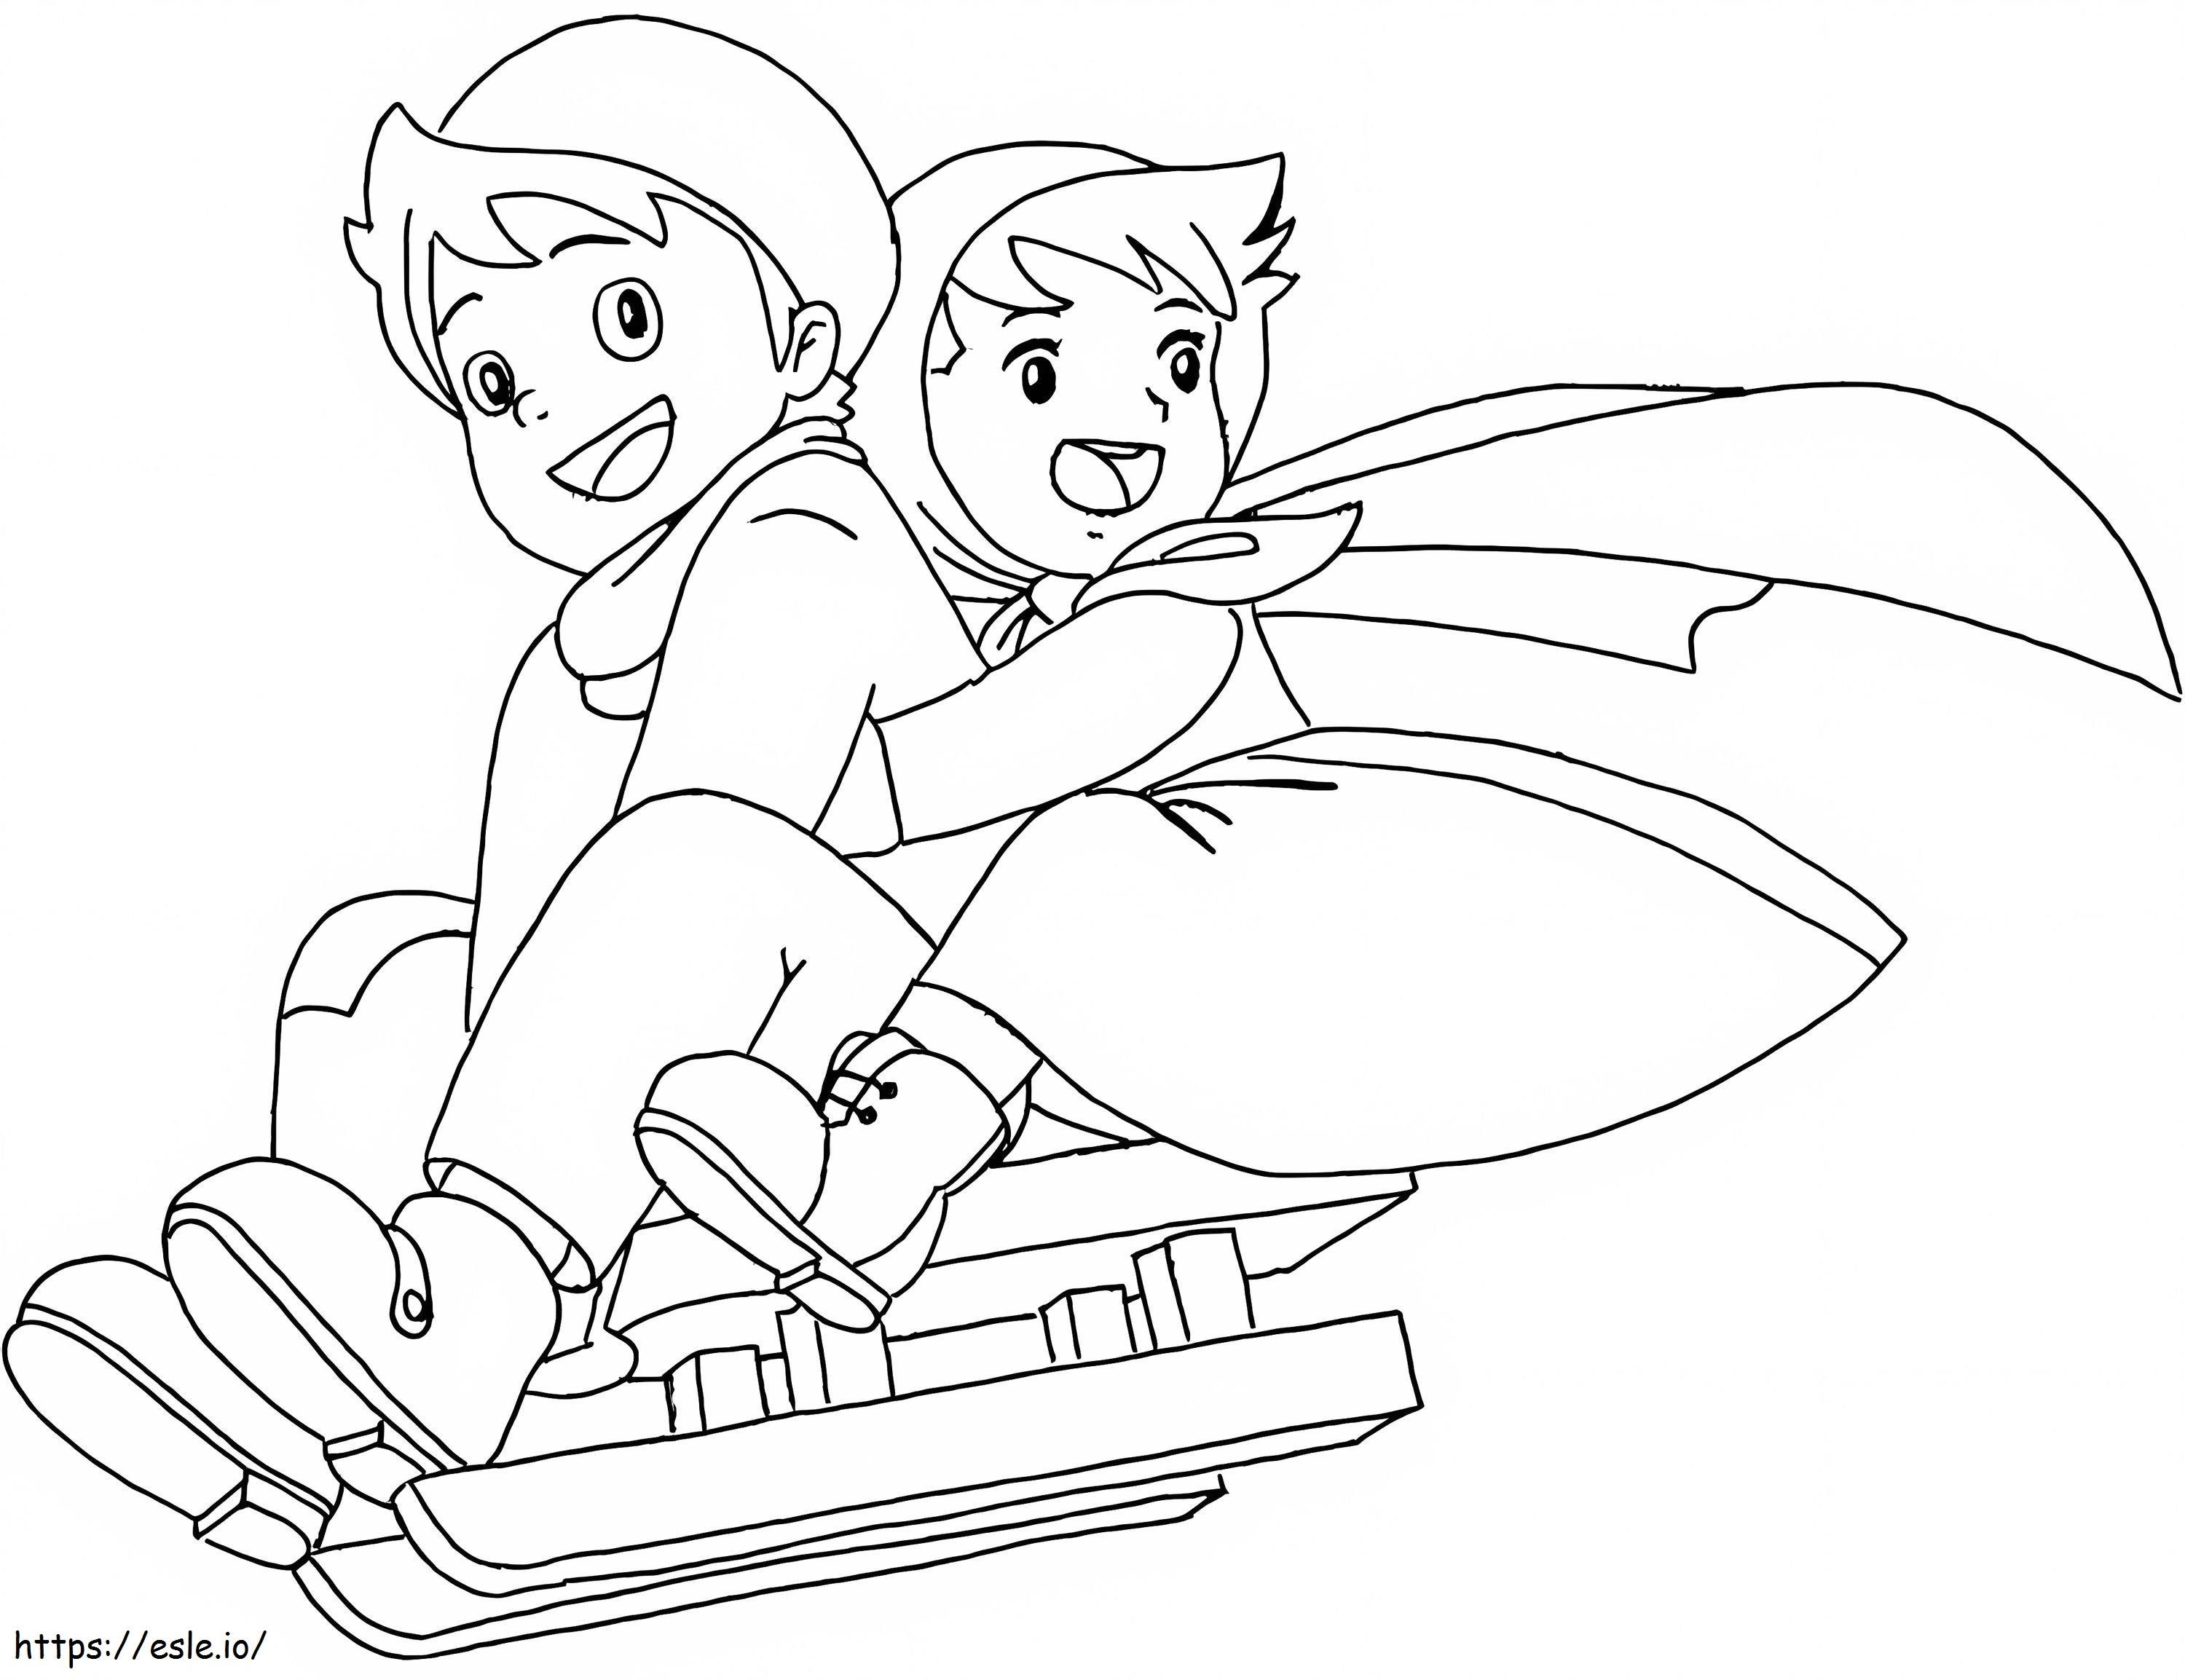 Peter And Heidi coloring page